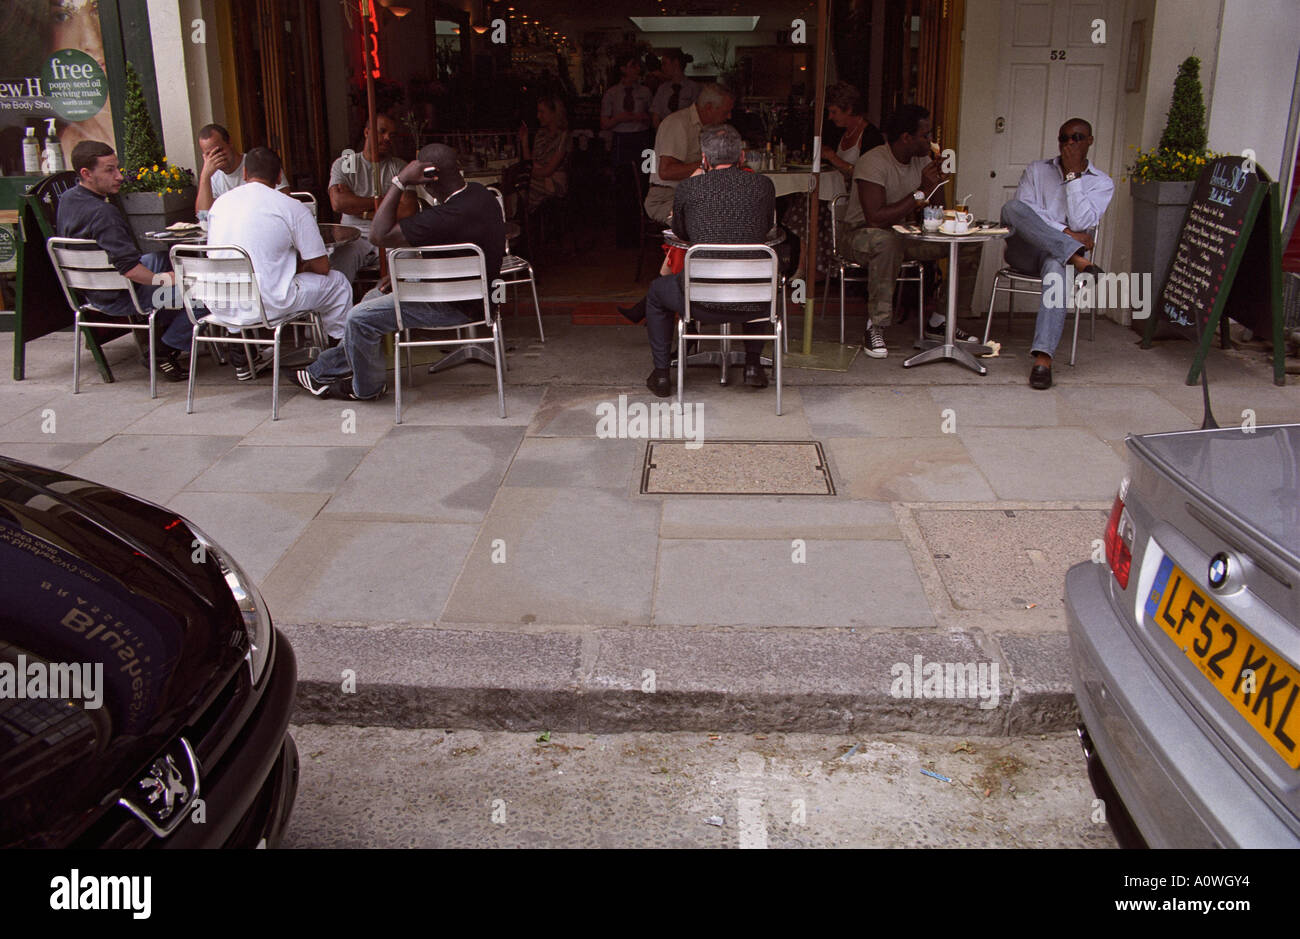 ENGLAND LONDON Cafe society framed between shiny new sports cars on the King s Road in affluent Chelsea Stock Photo